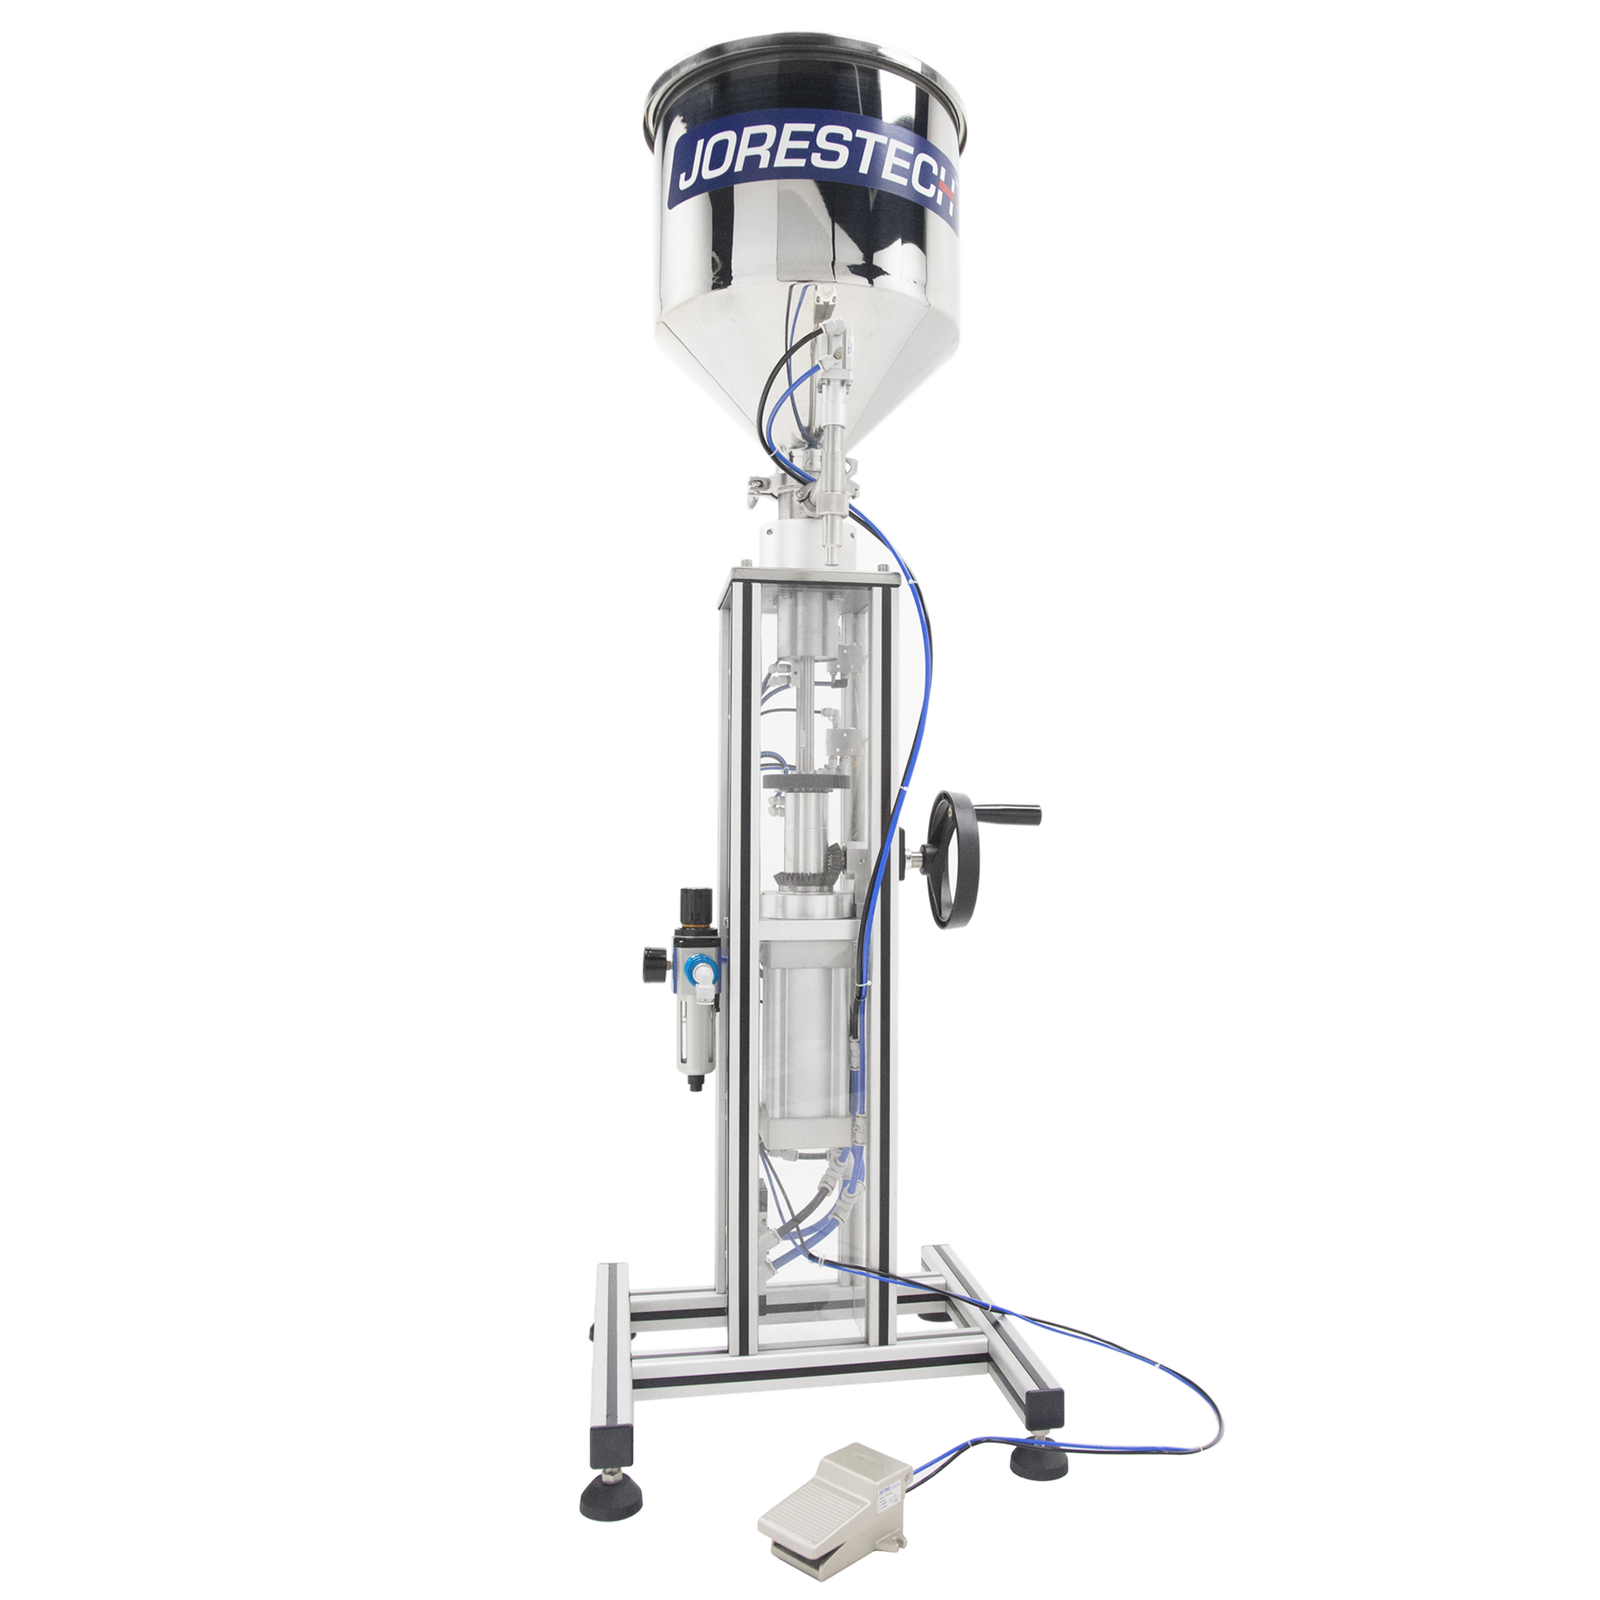 The Jorestech stainless steel Pneumatic High Viscosity Piston Filler with high capacity hopper and foot pedal